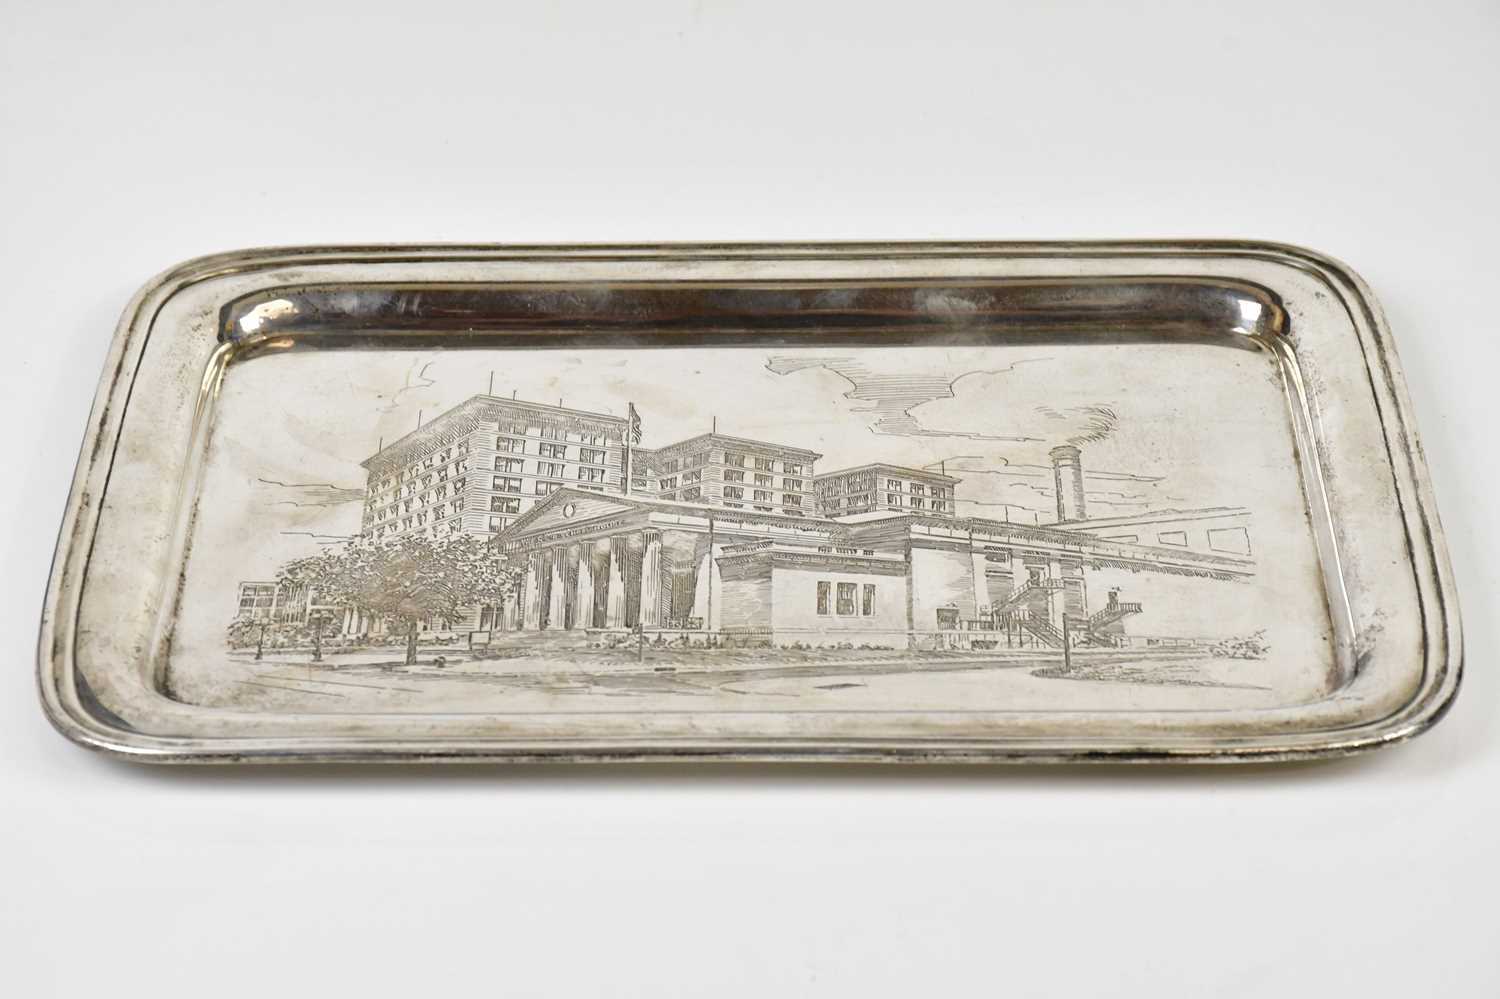 A sterling silver rectangular tray with engraved decoration of the N.G.R School House America,